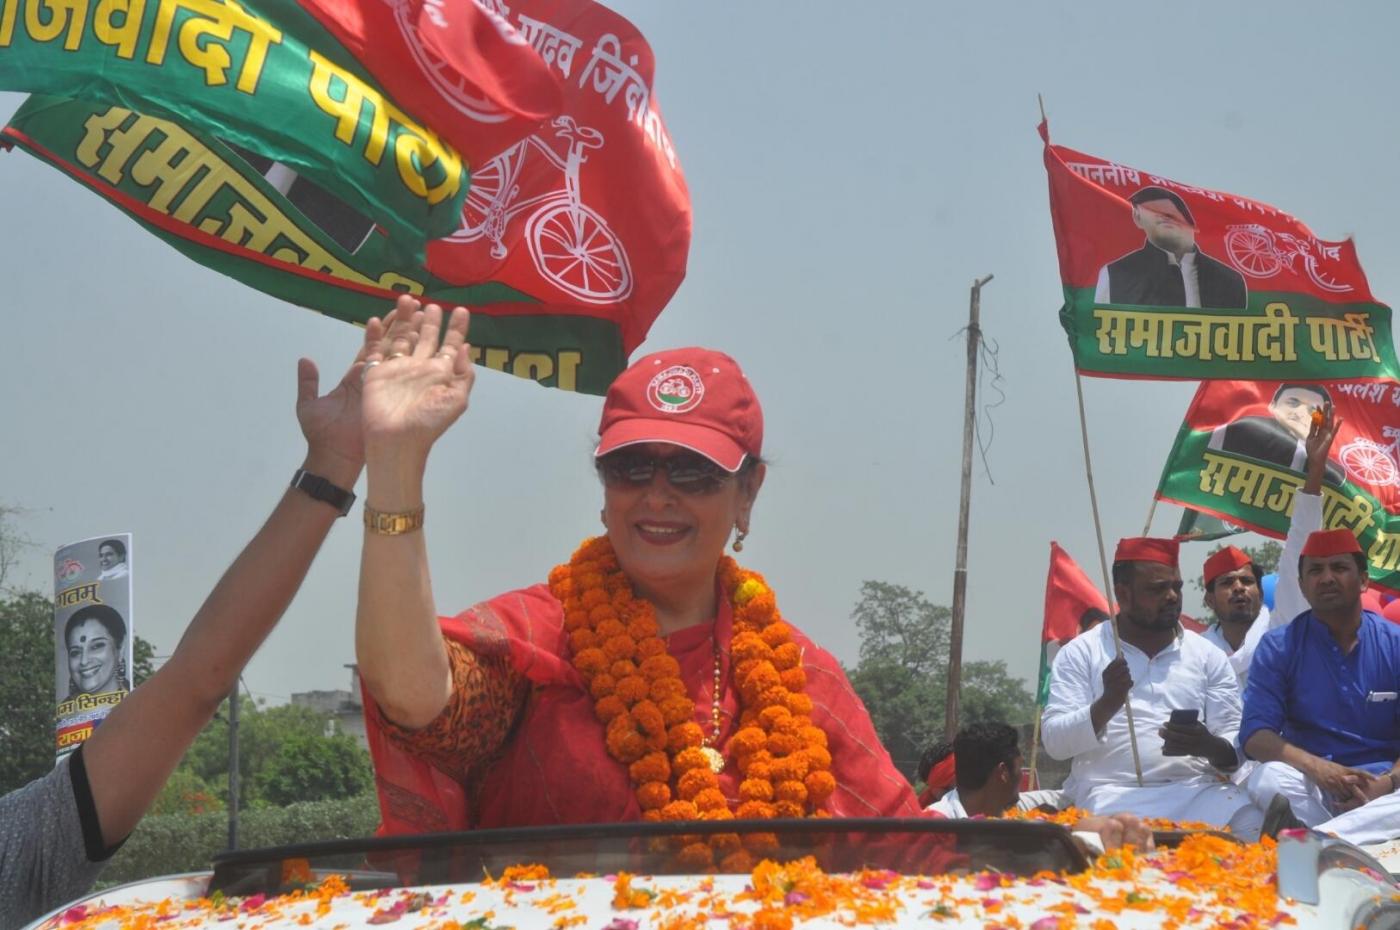 Lucknow: Samajwadi Party's Lok Sabha candidate from Lucknow, Poonam Sinha waves at supporters during a roadshow ahead of the 2019 Lok Sabha elections, in Lucknow on April 26, 2019. (Photo: IANS) by .